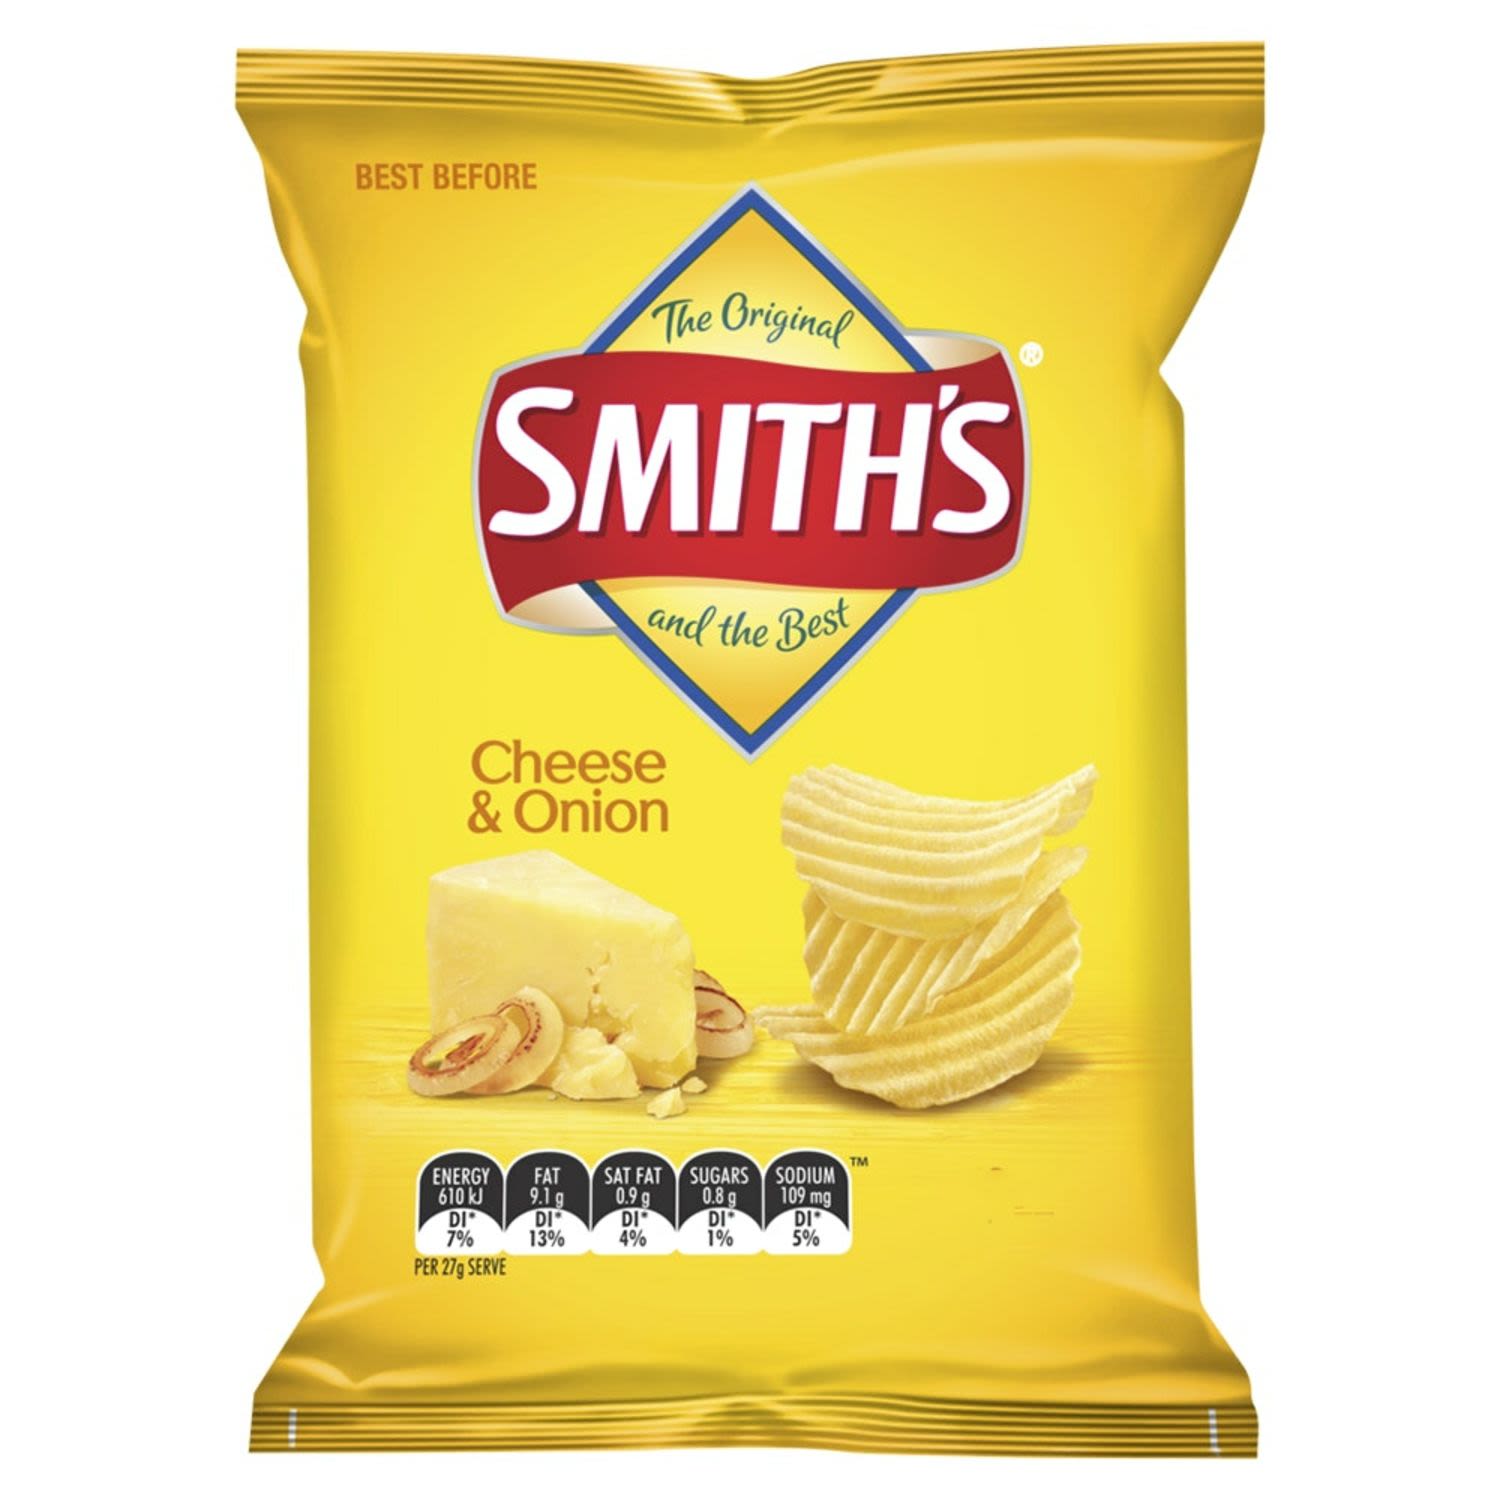 Smith's Crinkle Cut Cheese & Onion Potato Chips 170g